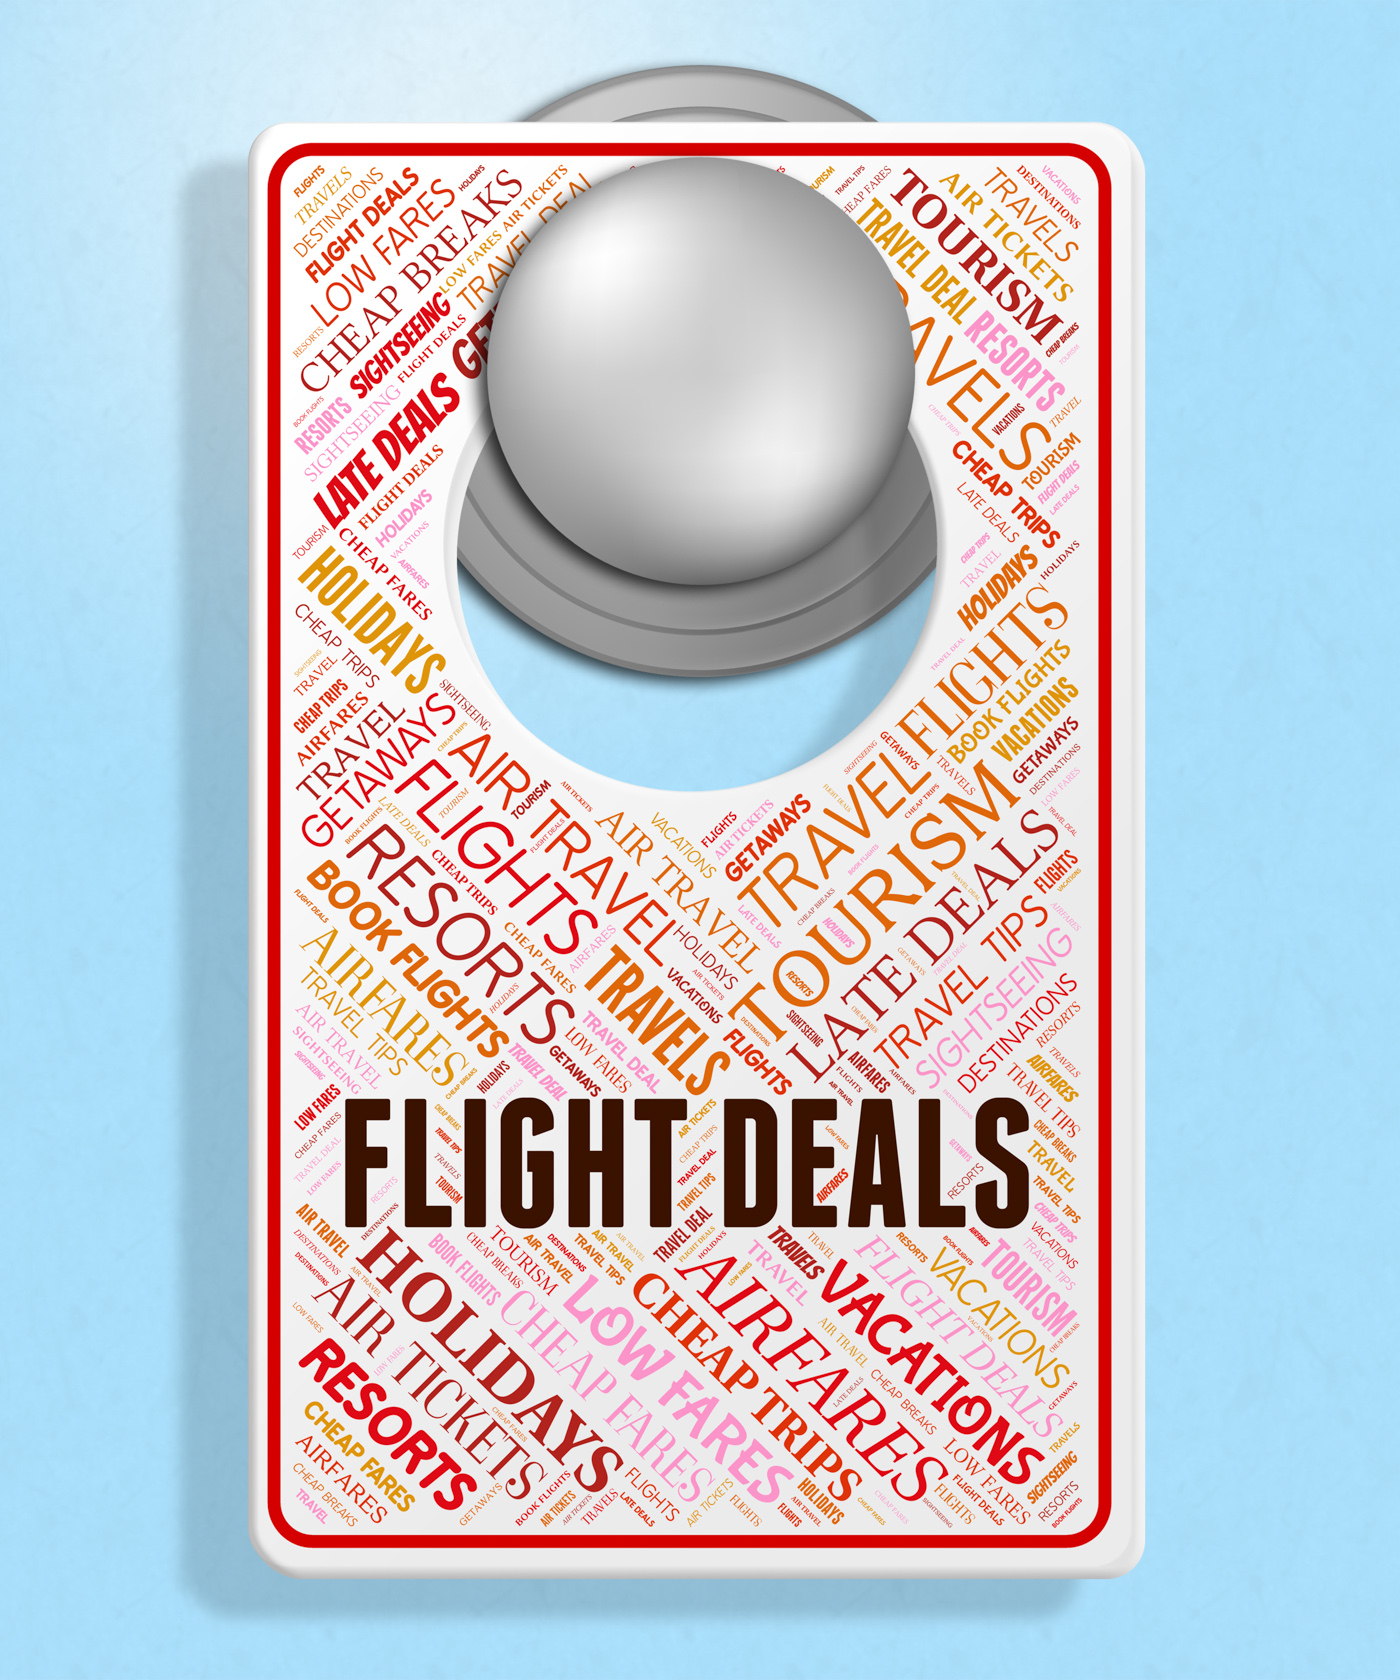 Flight deals indicates promotion plane and sign photo